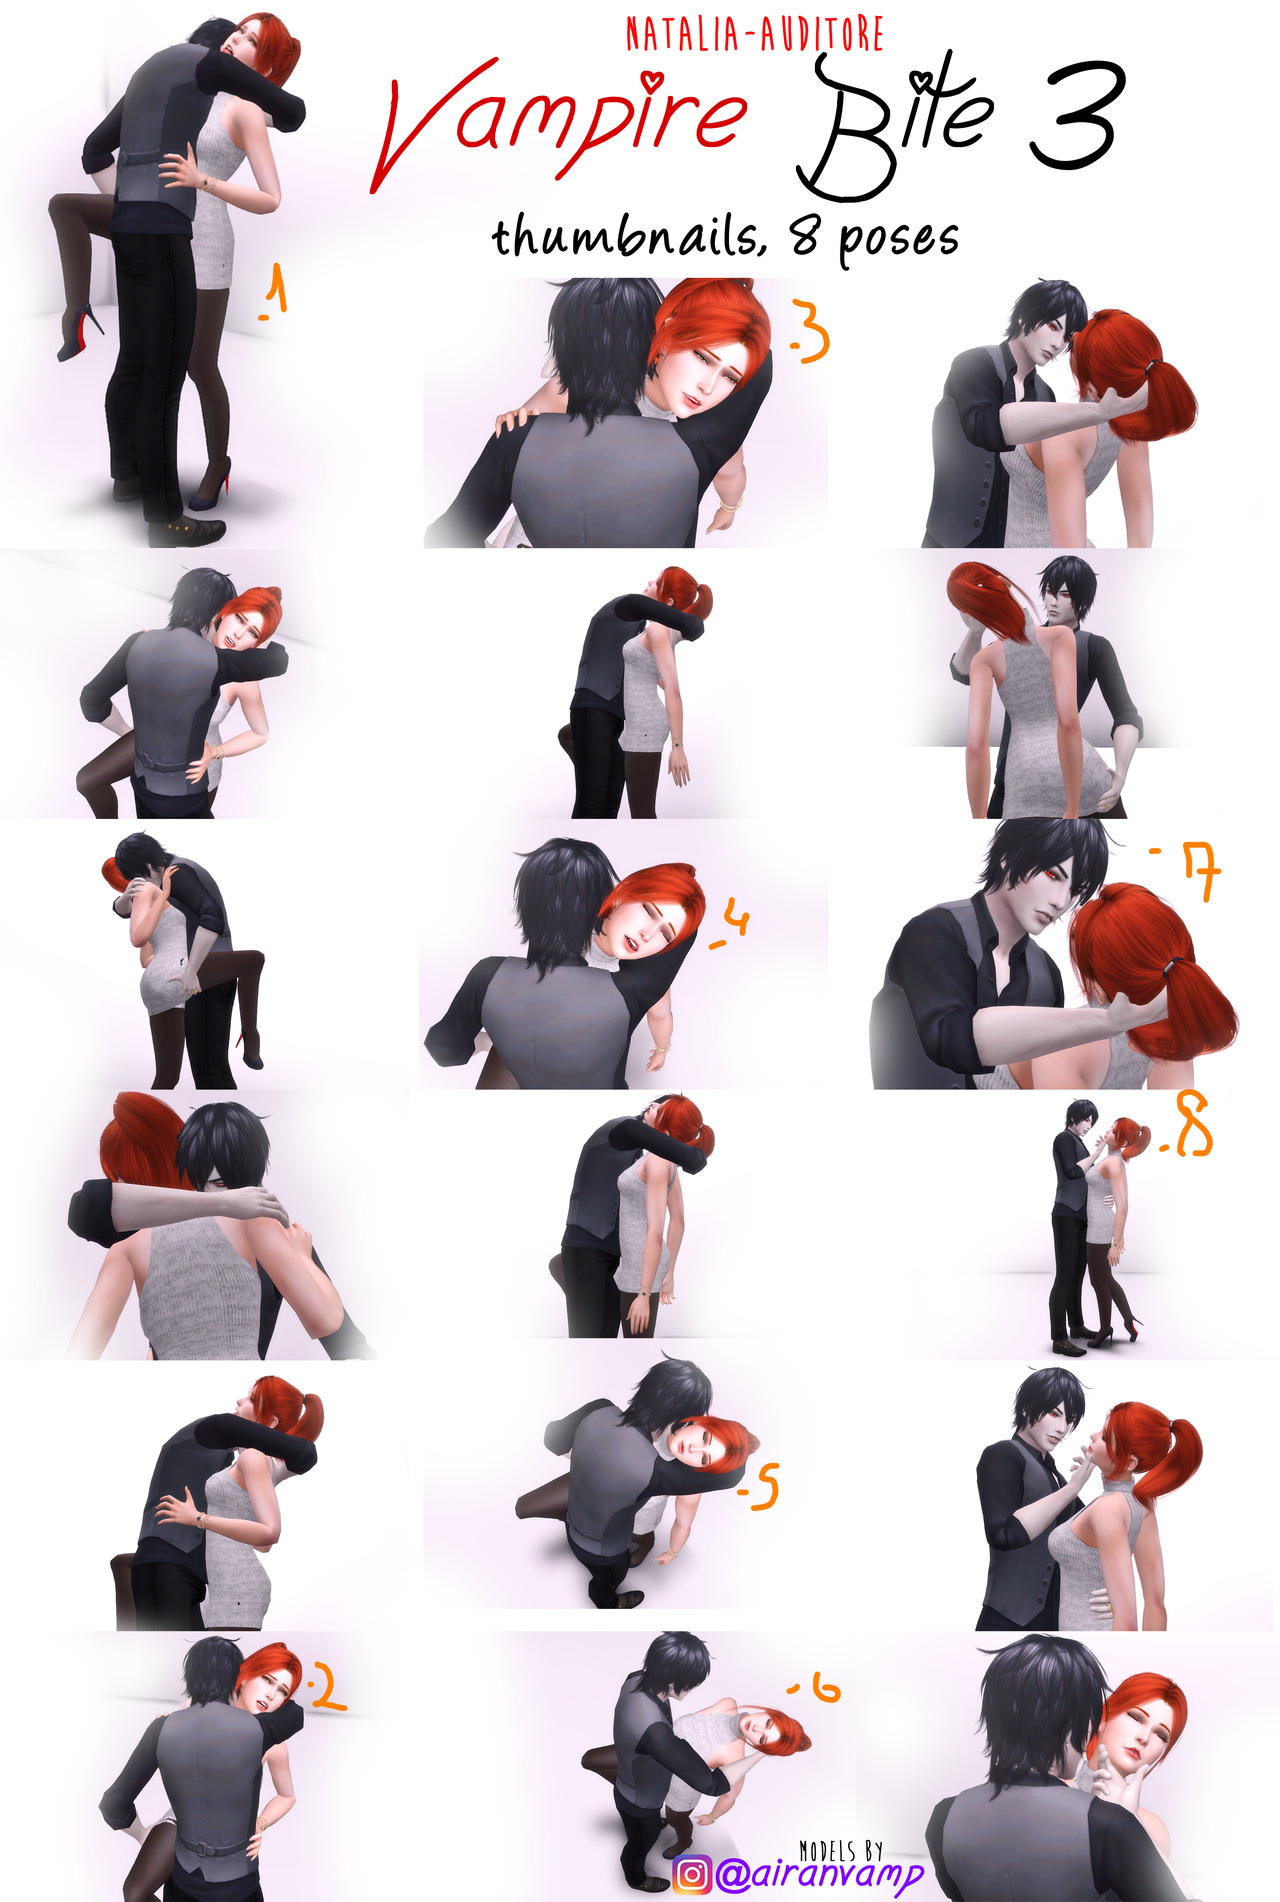 how to keep vampires away sims 4